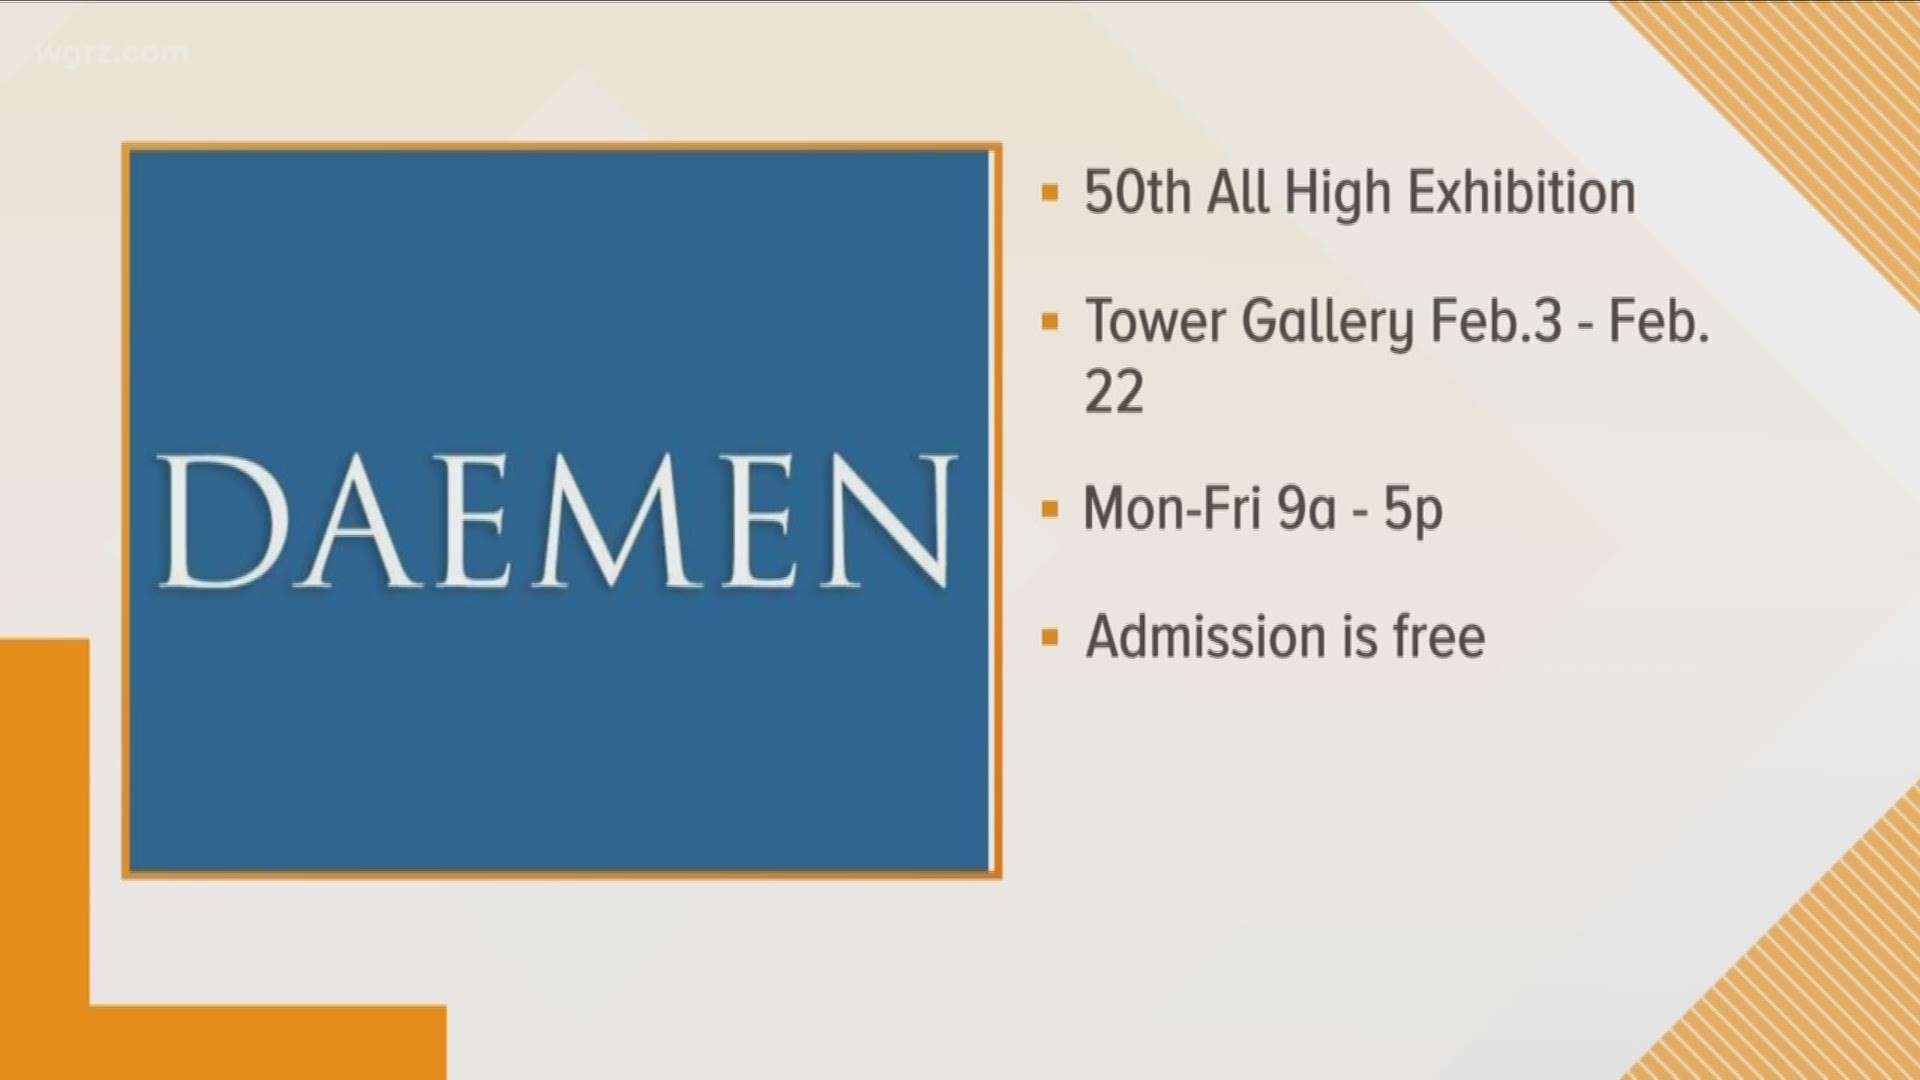 Check out a special art exhibition at Daemen College now through February 22nd at the Elizabeth C. Tower Gallery on campus.